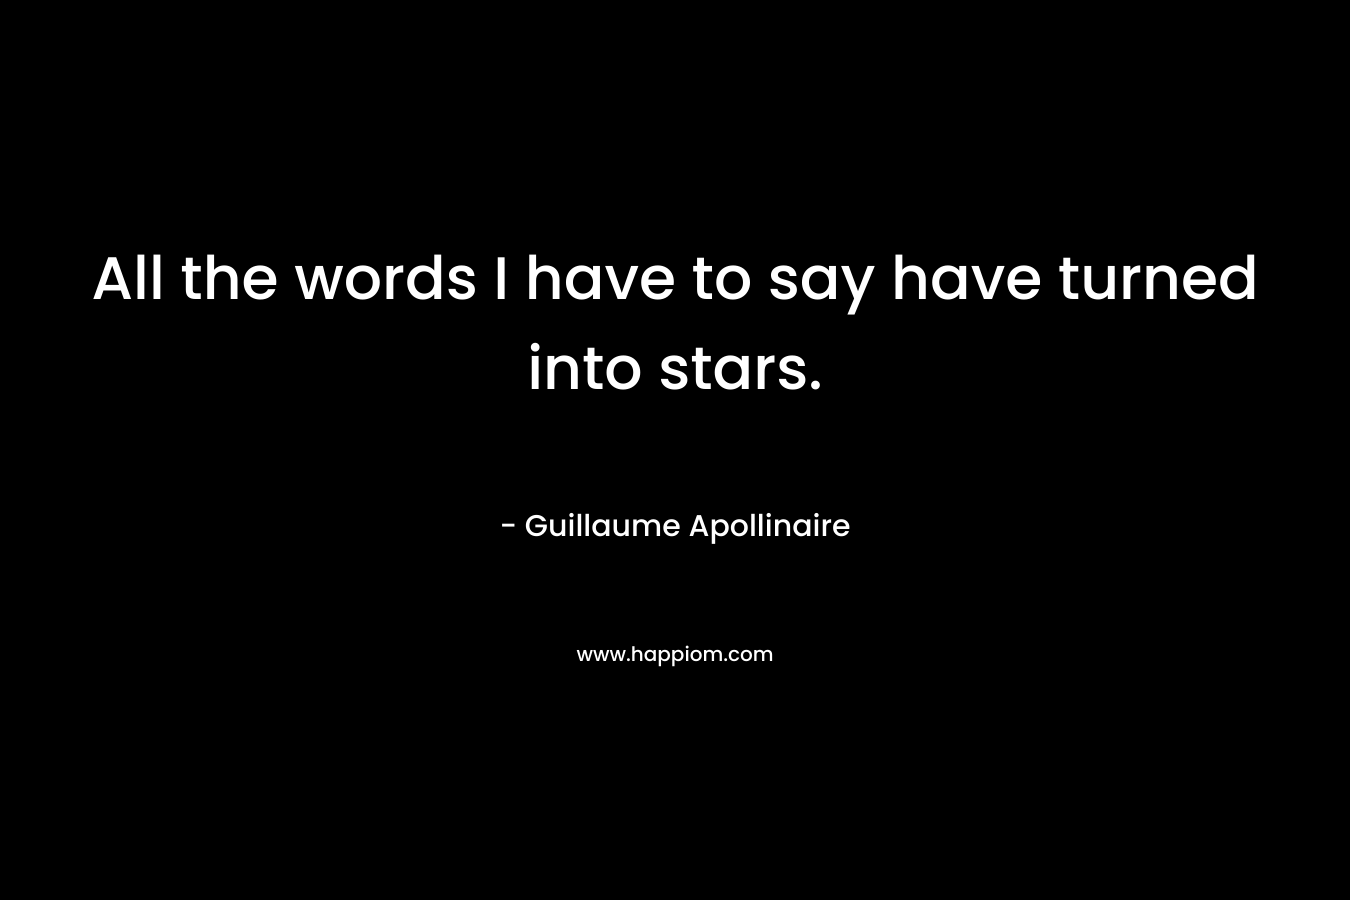 All the words I have to say have turned into stars.